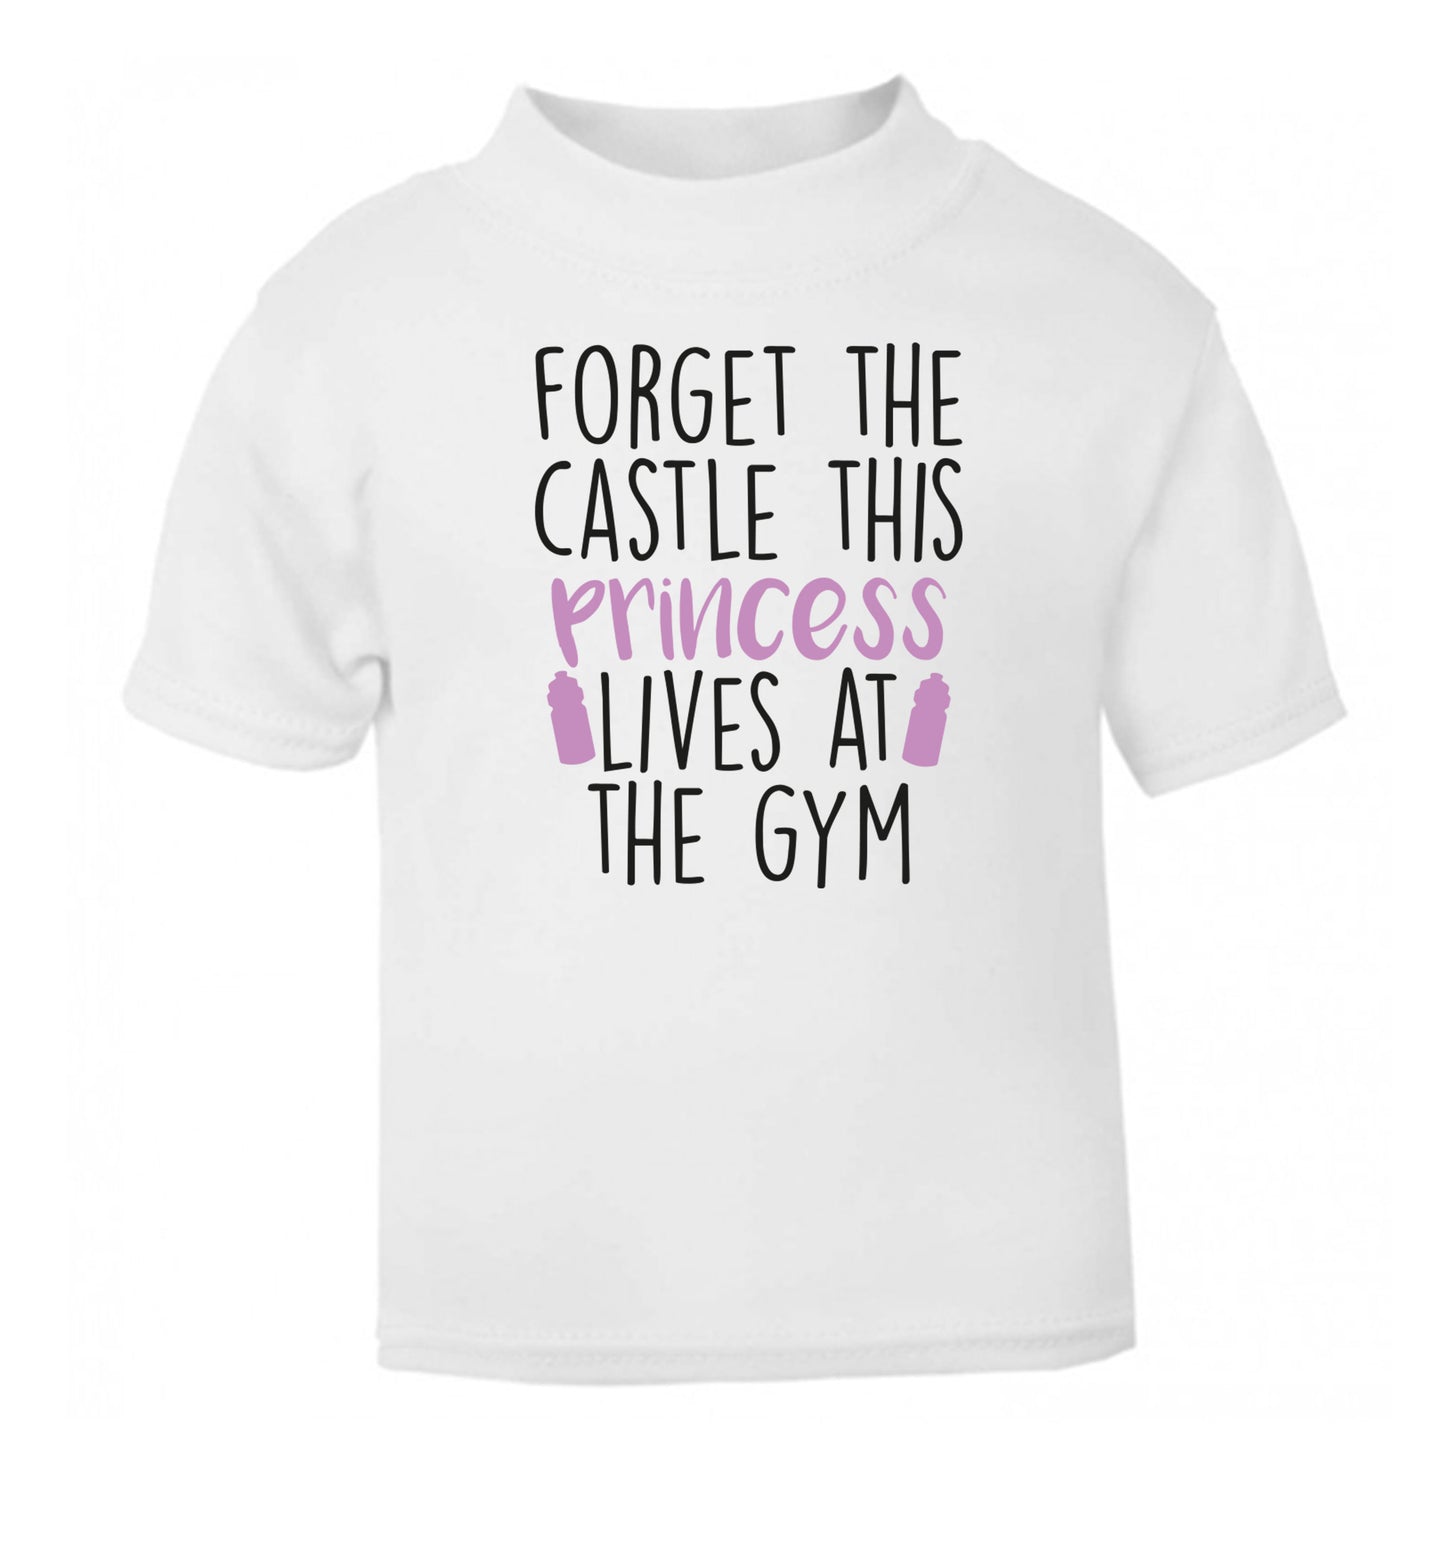 Forget the castle this princess lives at the gym white Baby Toddler Tshirt 2 Years